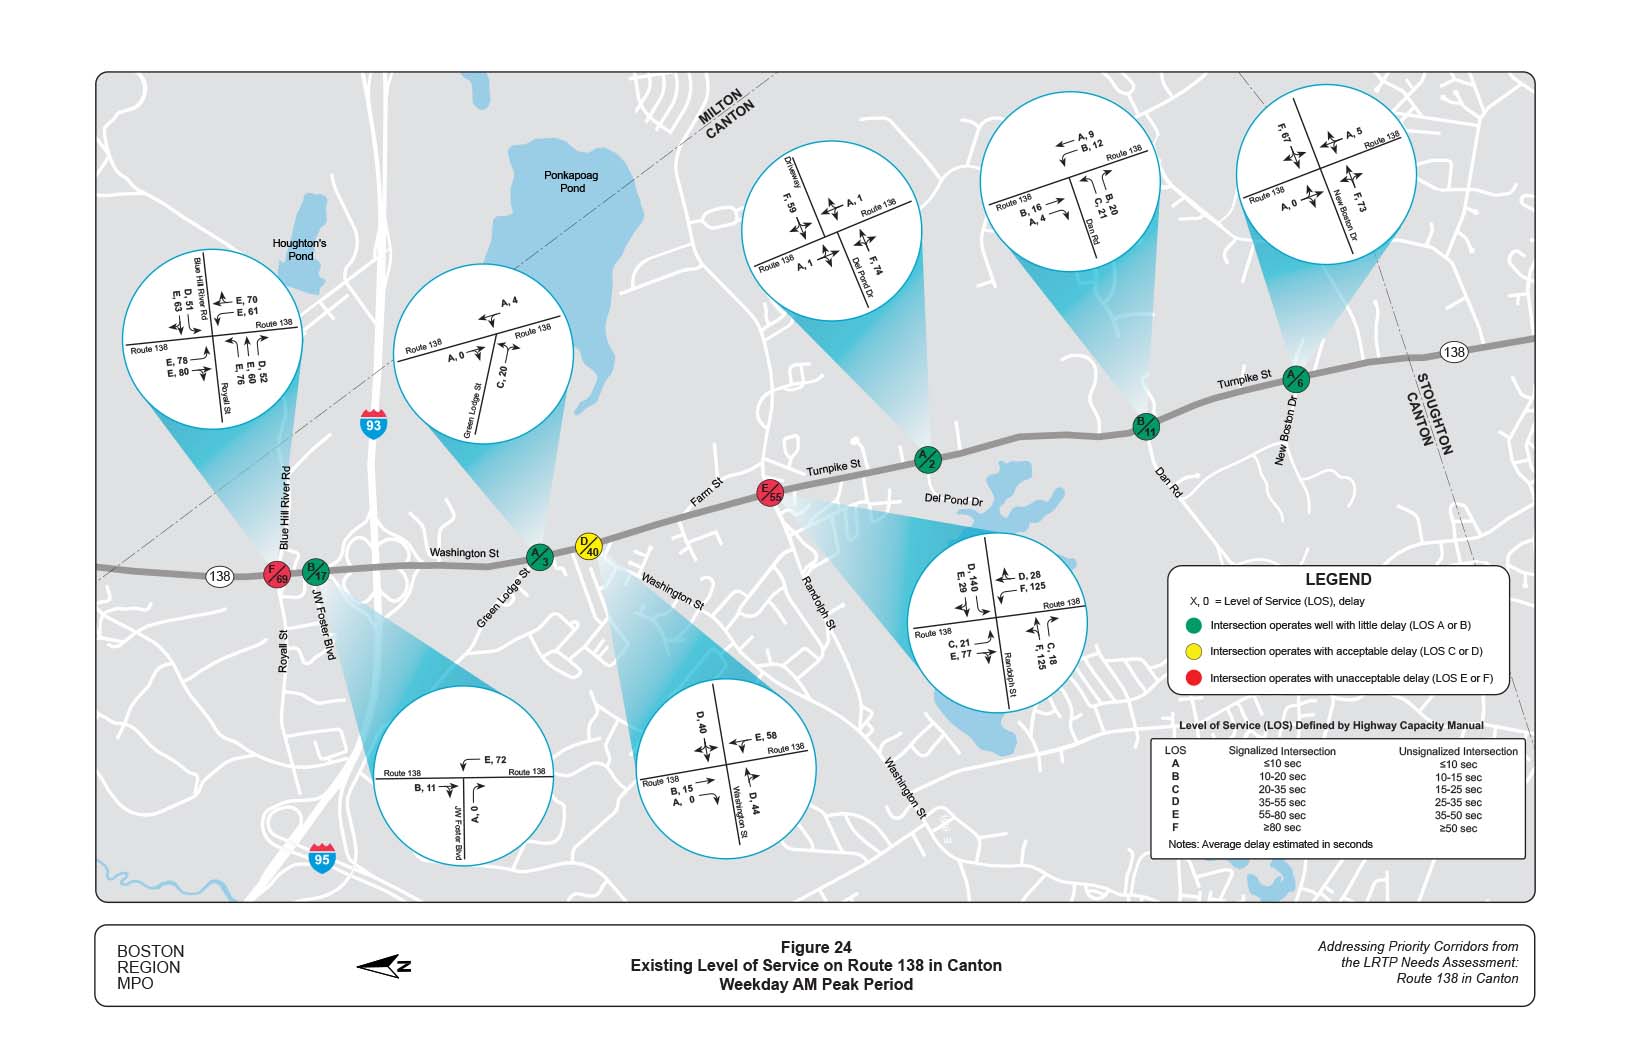 Figure 24 is a map of the study area with diagrams showing the existing level of service provided by intersections on Route 138 during the weekday AM peak period.